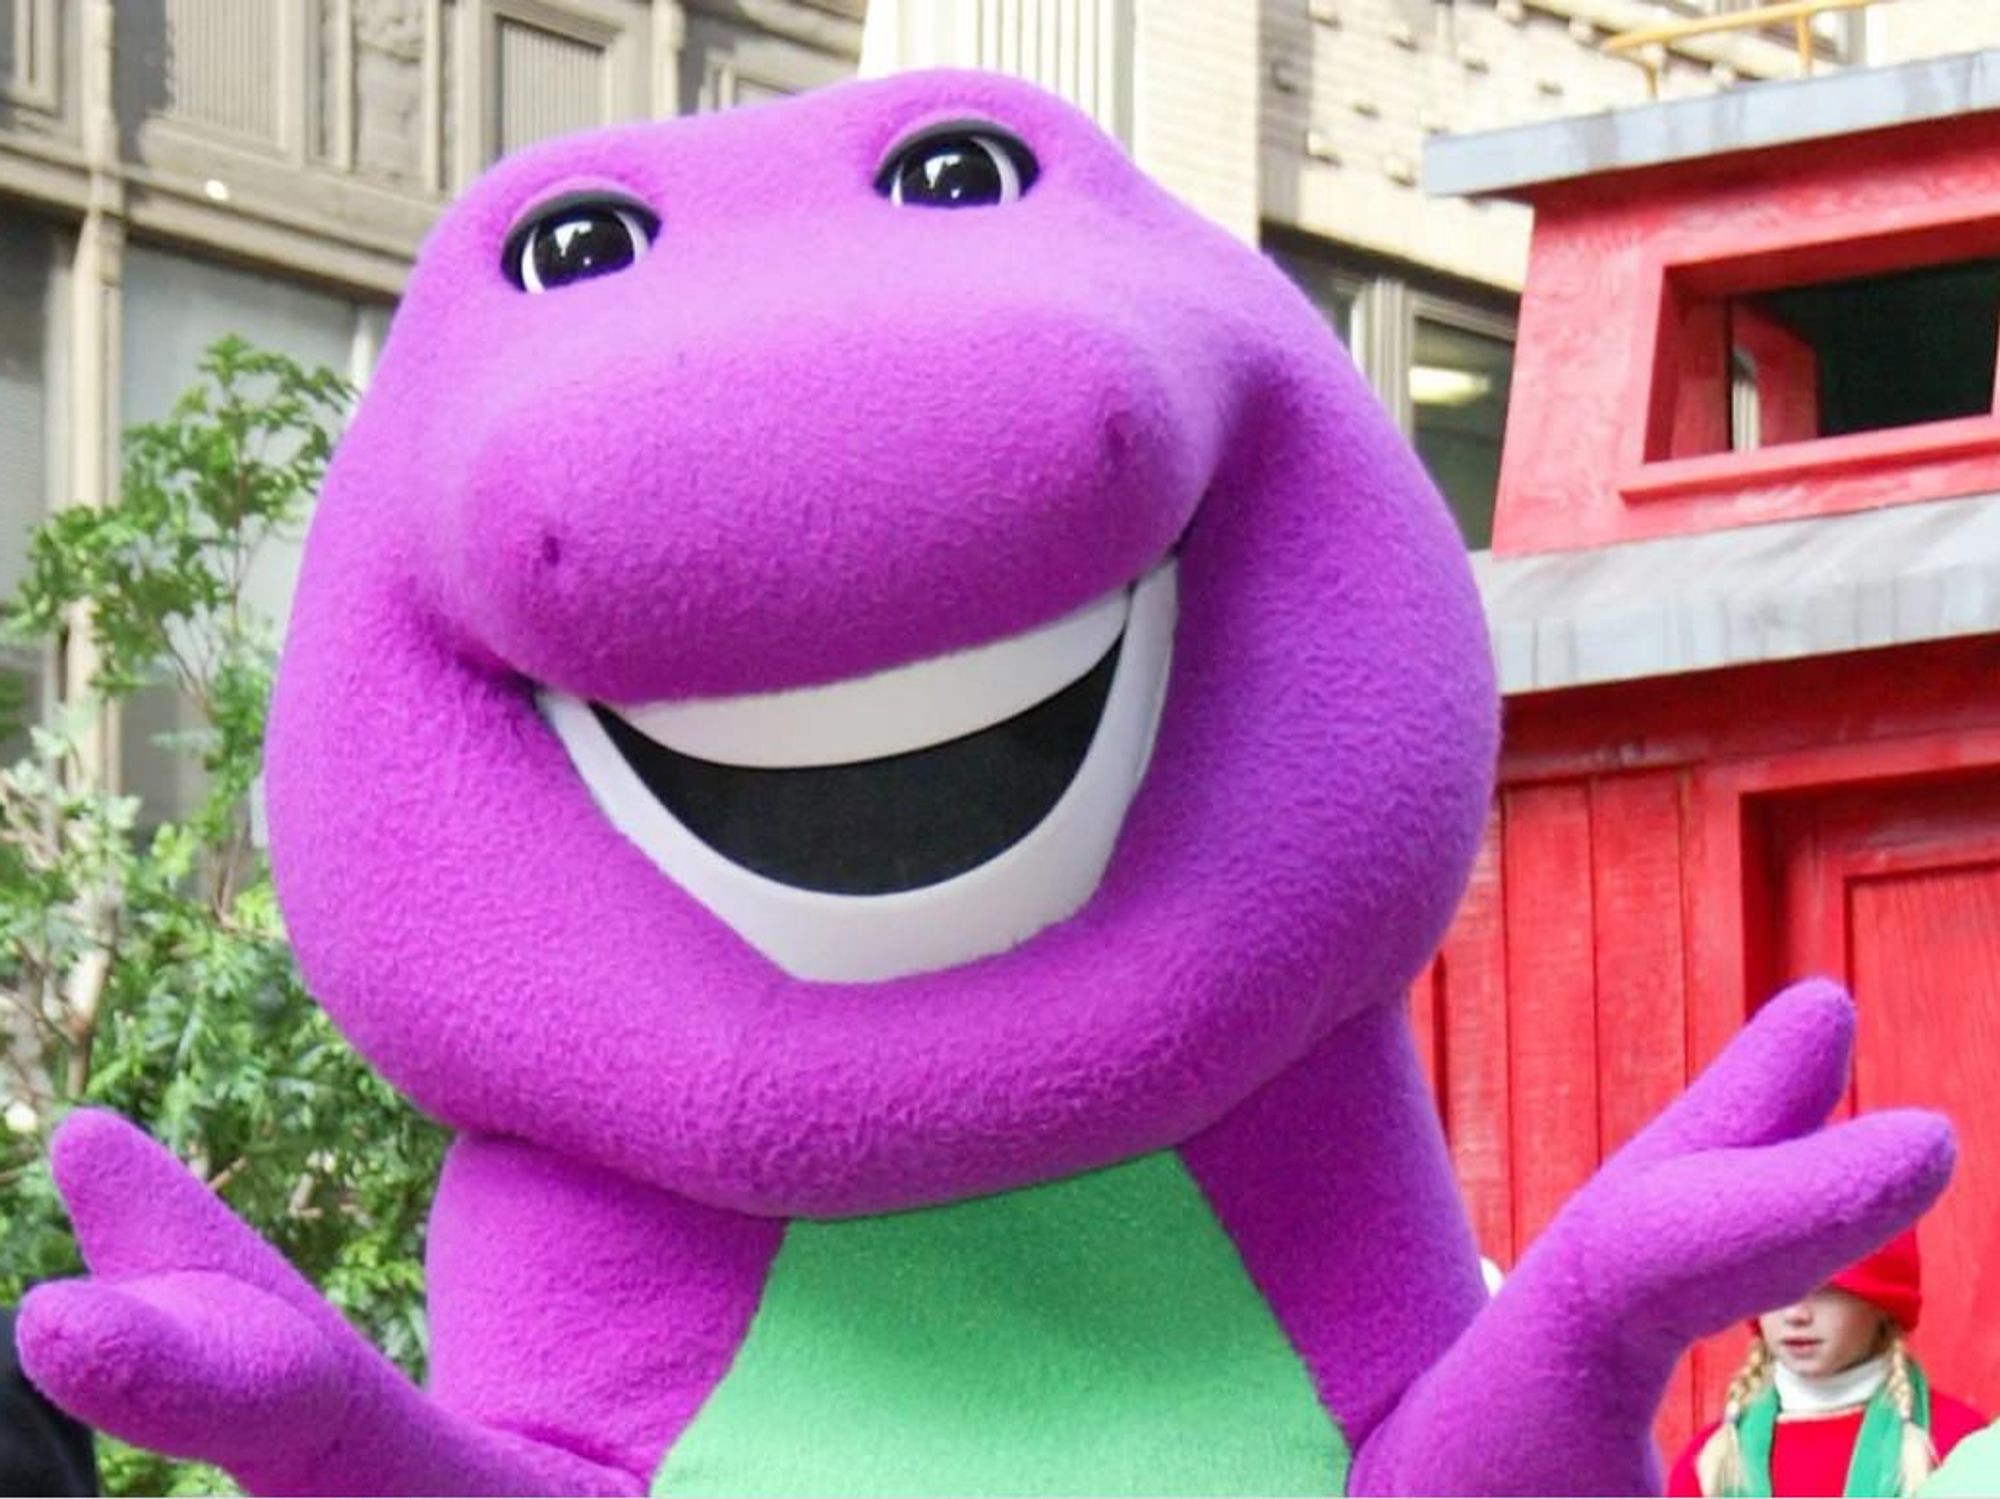 New documentary digs down on Barney, the purple dinosaur hatched in Texas